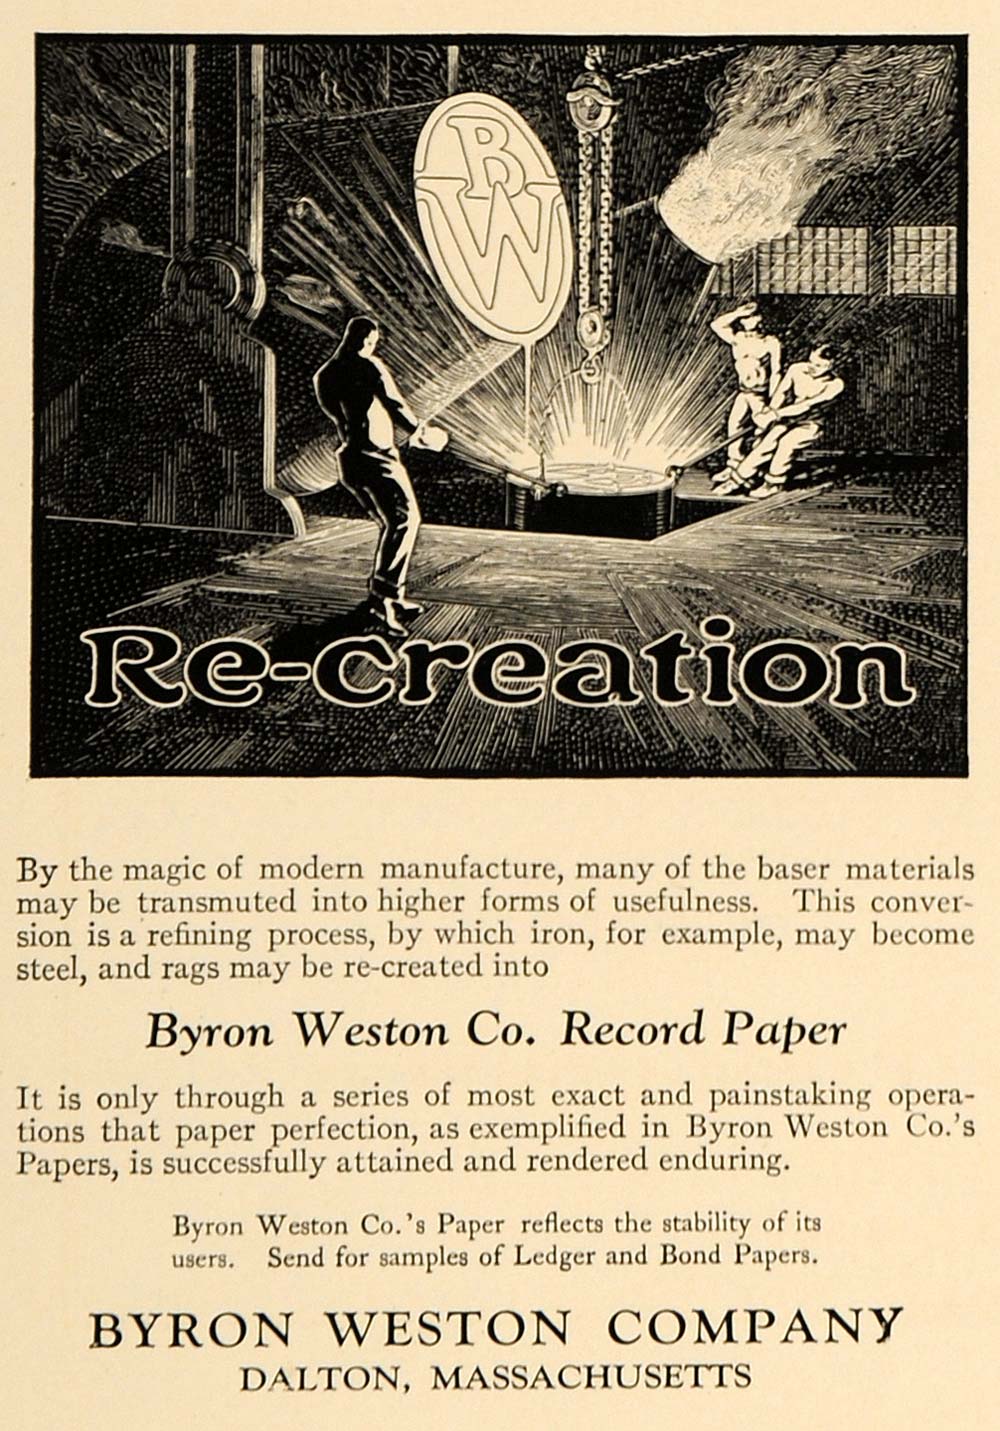 1922 Ad Byron Weston Record Paper Machinery Workers Men - ORIGINAL IPR1